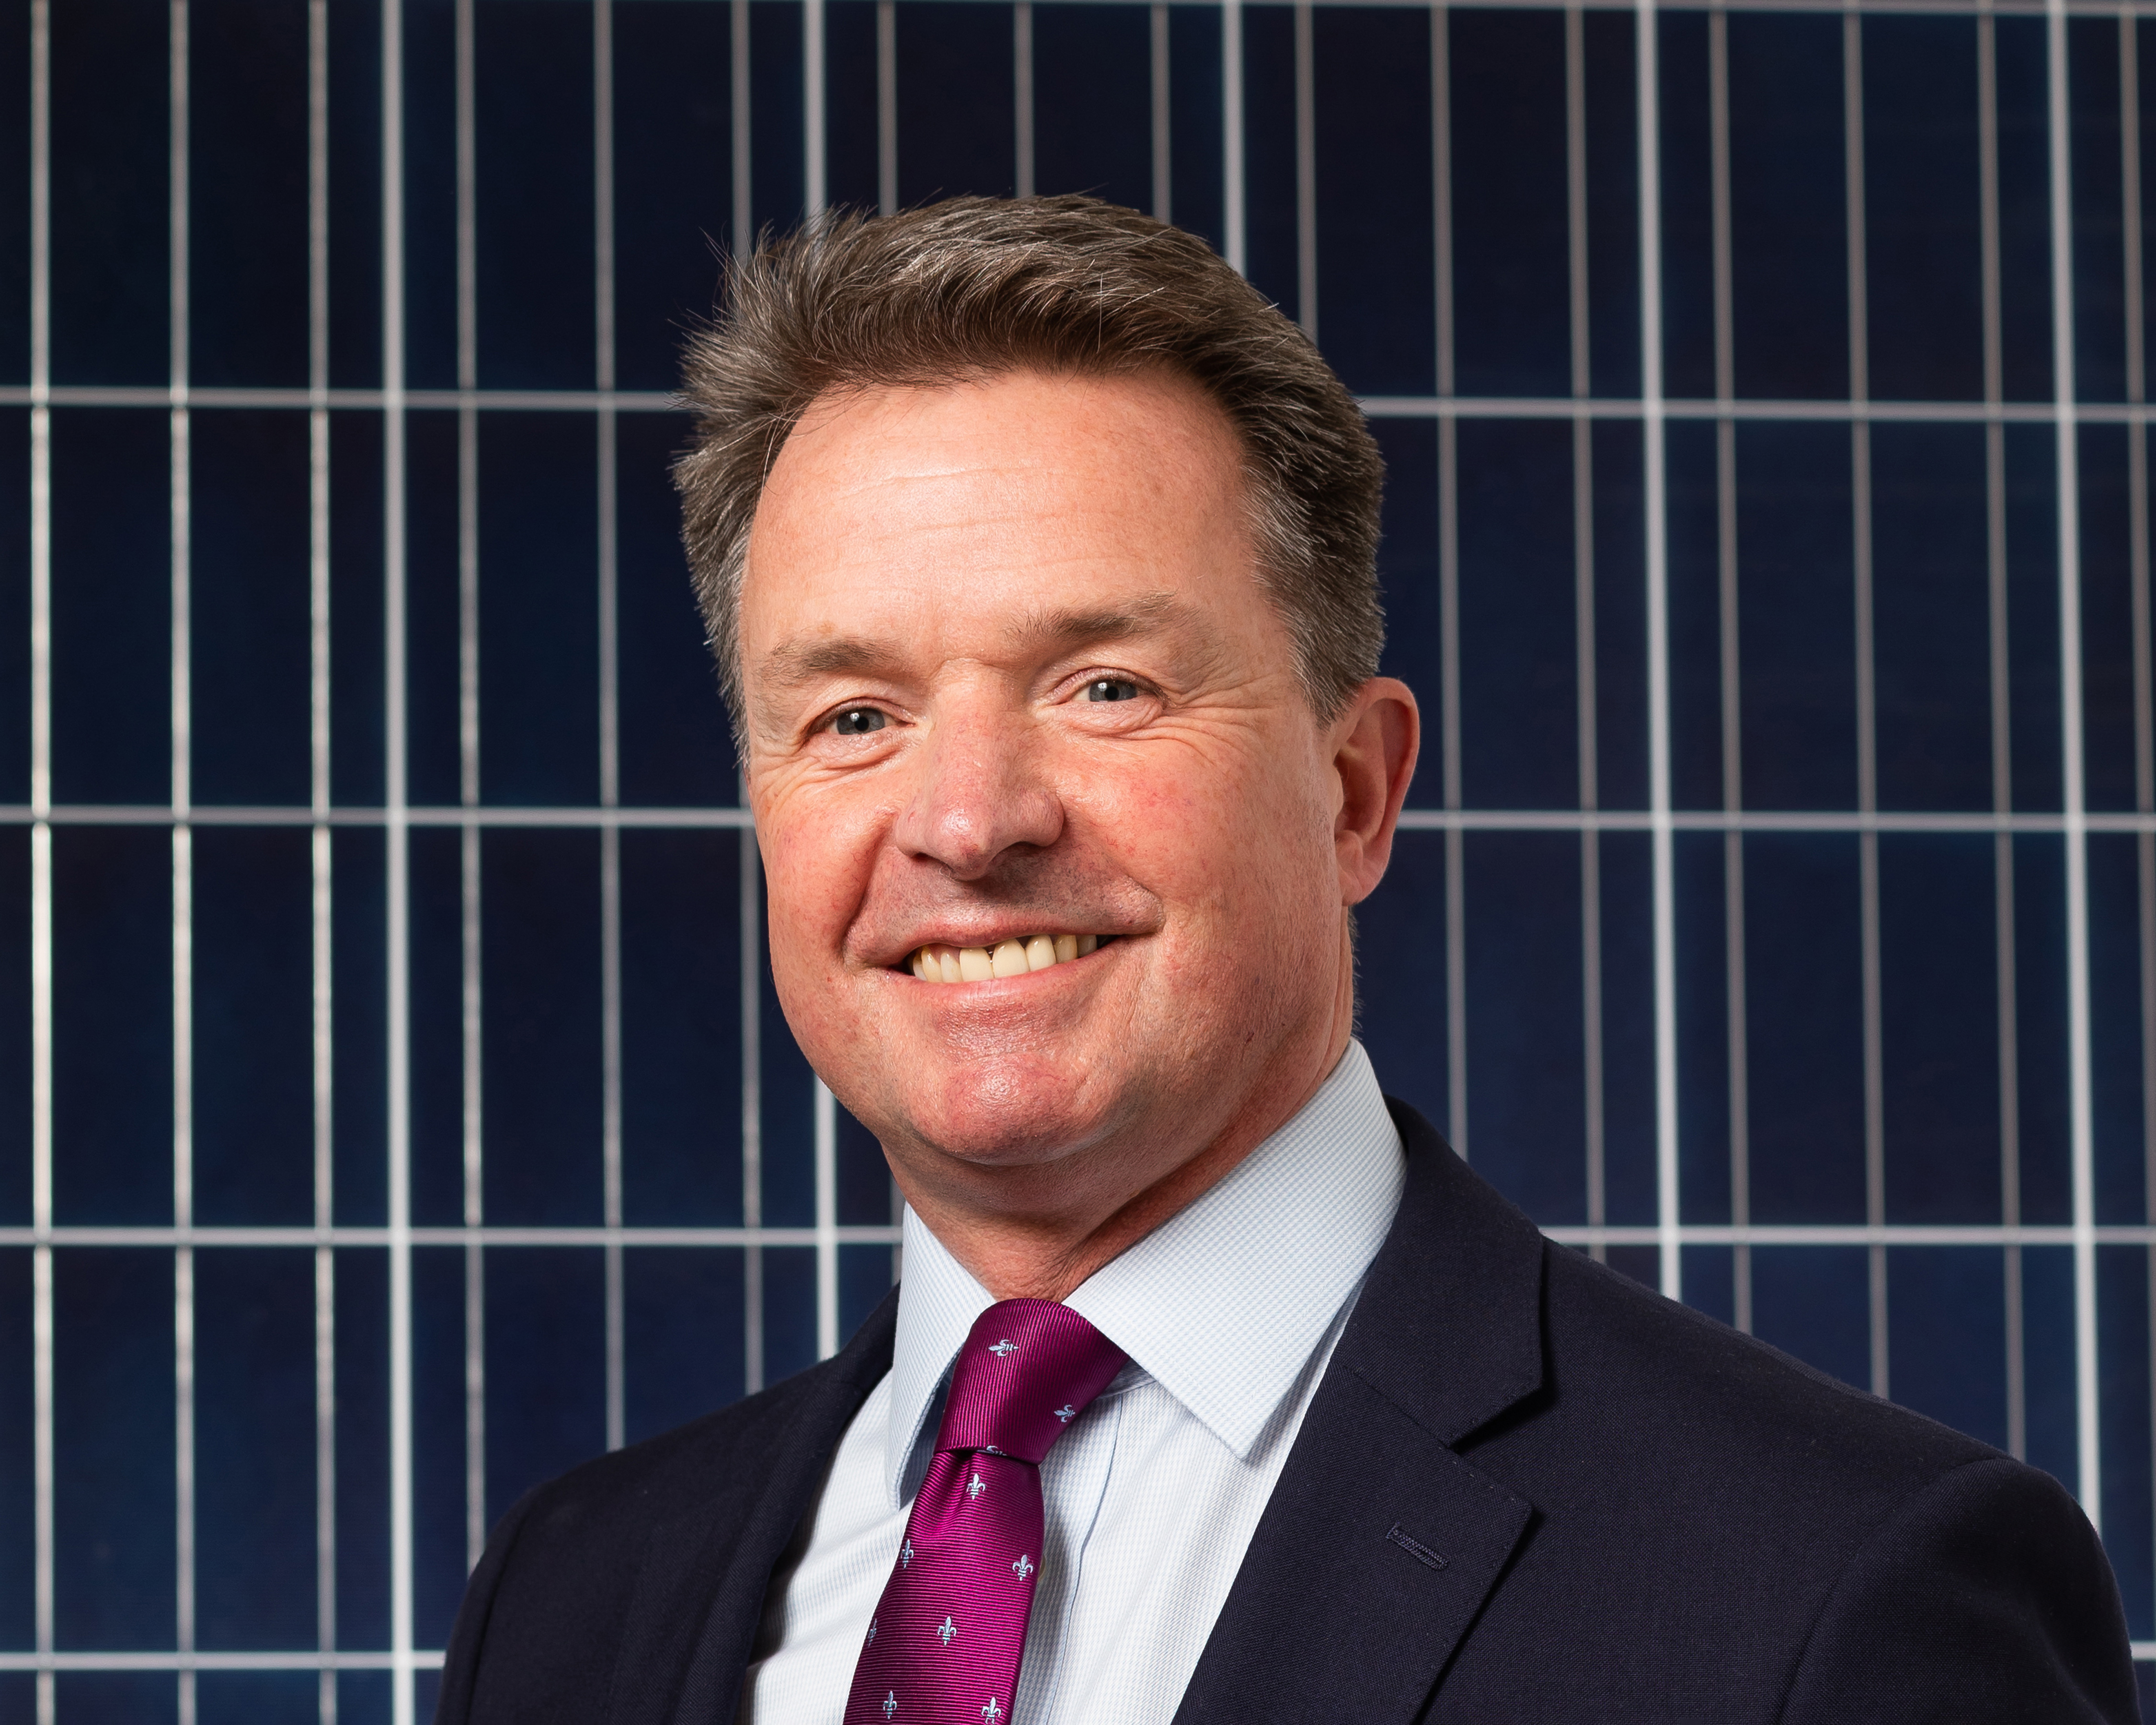 John Forster: Ensuring a smart energy transition - challenges and opportunities